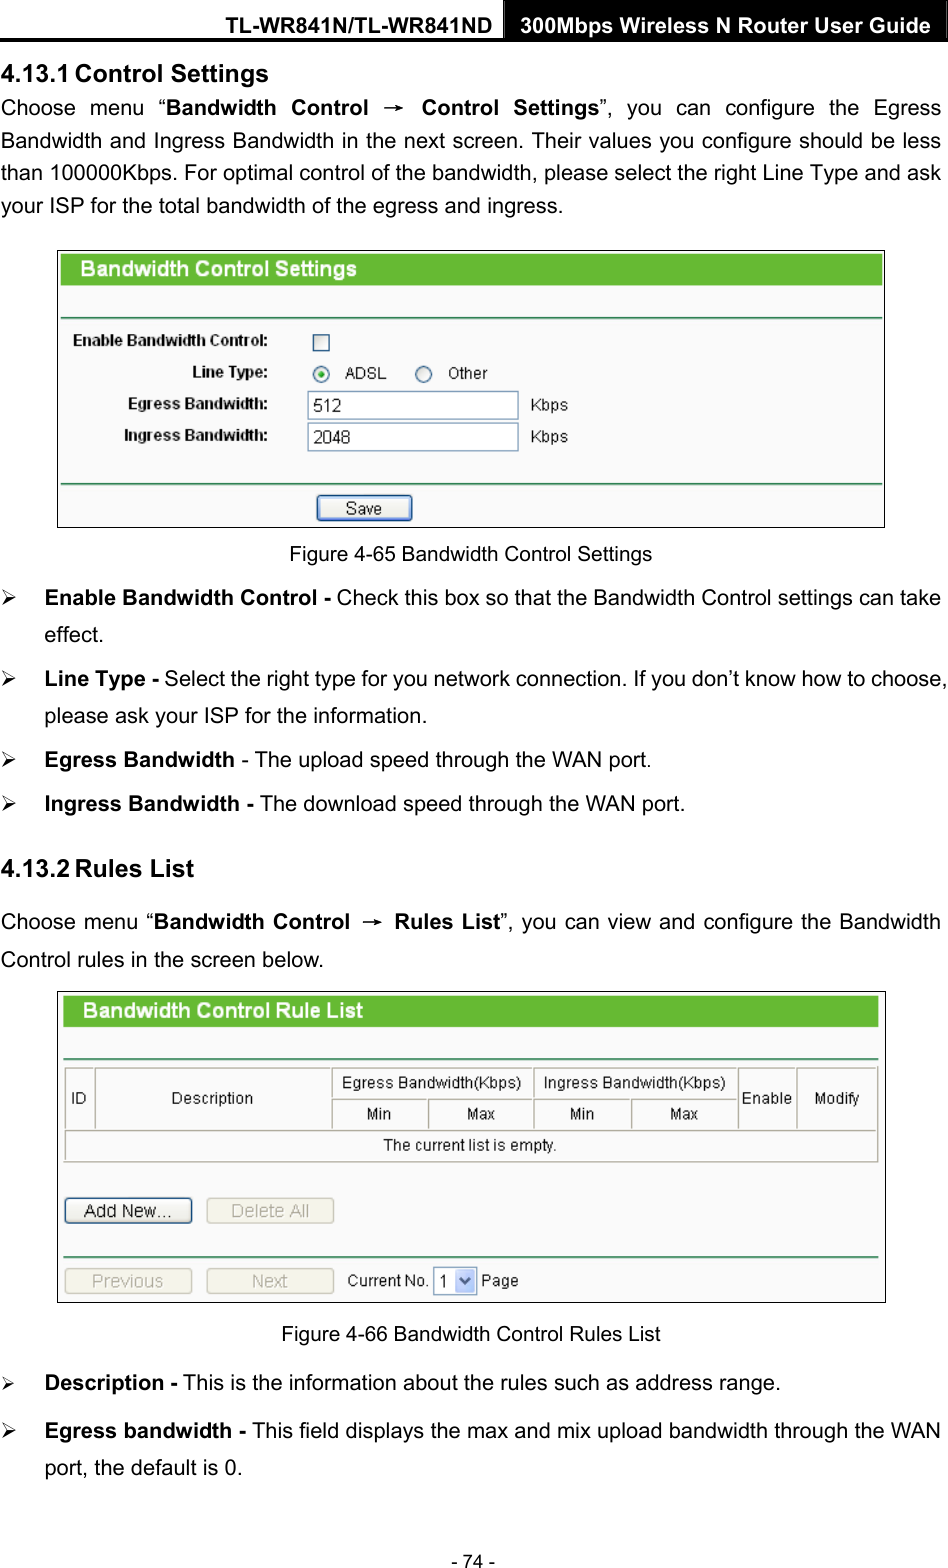 TL-WR841N/TL-WR841ND 300Mbps Wireless N Router User Guide - 74 - 4.13.1 Control Settings Choose menu “Bandwidth Control → Control Settings”, you can configure the Egress Bandwidth and Ingress Bandwidth in the next screen. Their values you configure should be less than 100000Kbps. For optimal control of the bandwidth, please select the right Line Type and ask your ISP for the total bandwidth of the egress and ingress.  Figure 4-65 Bandwidth Control Settings ¾ Enable Bandwidth Control - Check this box so that the Bandwidth Control settings can take effect. ¾ Line Type - Select the right type for you network connection. If you don’t know how to choose, please ask your ISP for the information. ¾ Egress Bandwidth - The upload speed through the WAN port. ¾ Ingress Bandwidth - The download speed through the WAN port. 4.13.2 Rules List Choose menu “Bandwidth Control → Rules List”, you can view and configure the Bandwidth Control rules in the screen below.  Figure 4-66 Bandwidth Control Rules List ¾ Description - This is the information about the rules such as address range. ¾ Egress bandwidth - This field displays the max and mix upload bandwidth through the WAN port, the default is 0. 